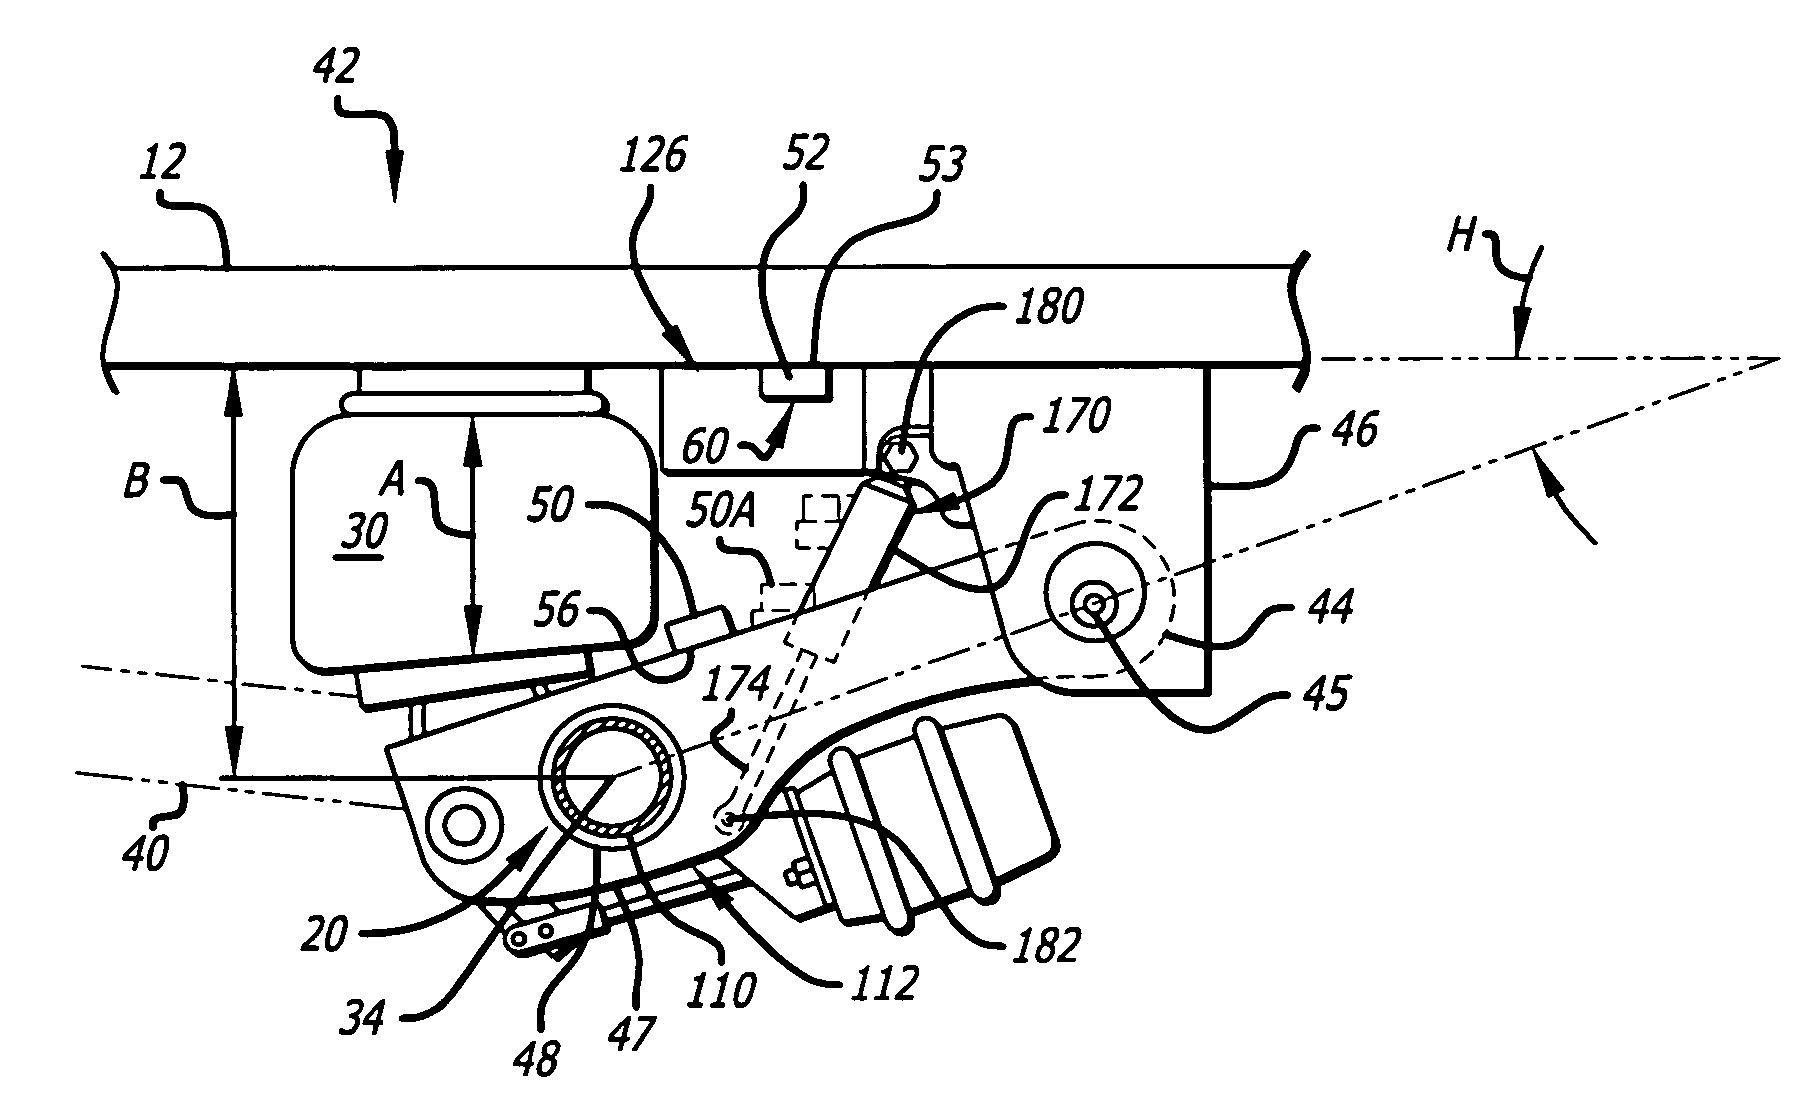 Electronic control of vehicle air suspension